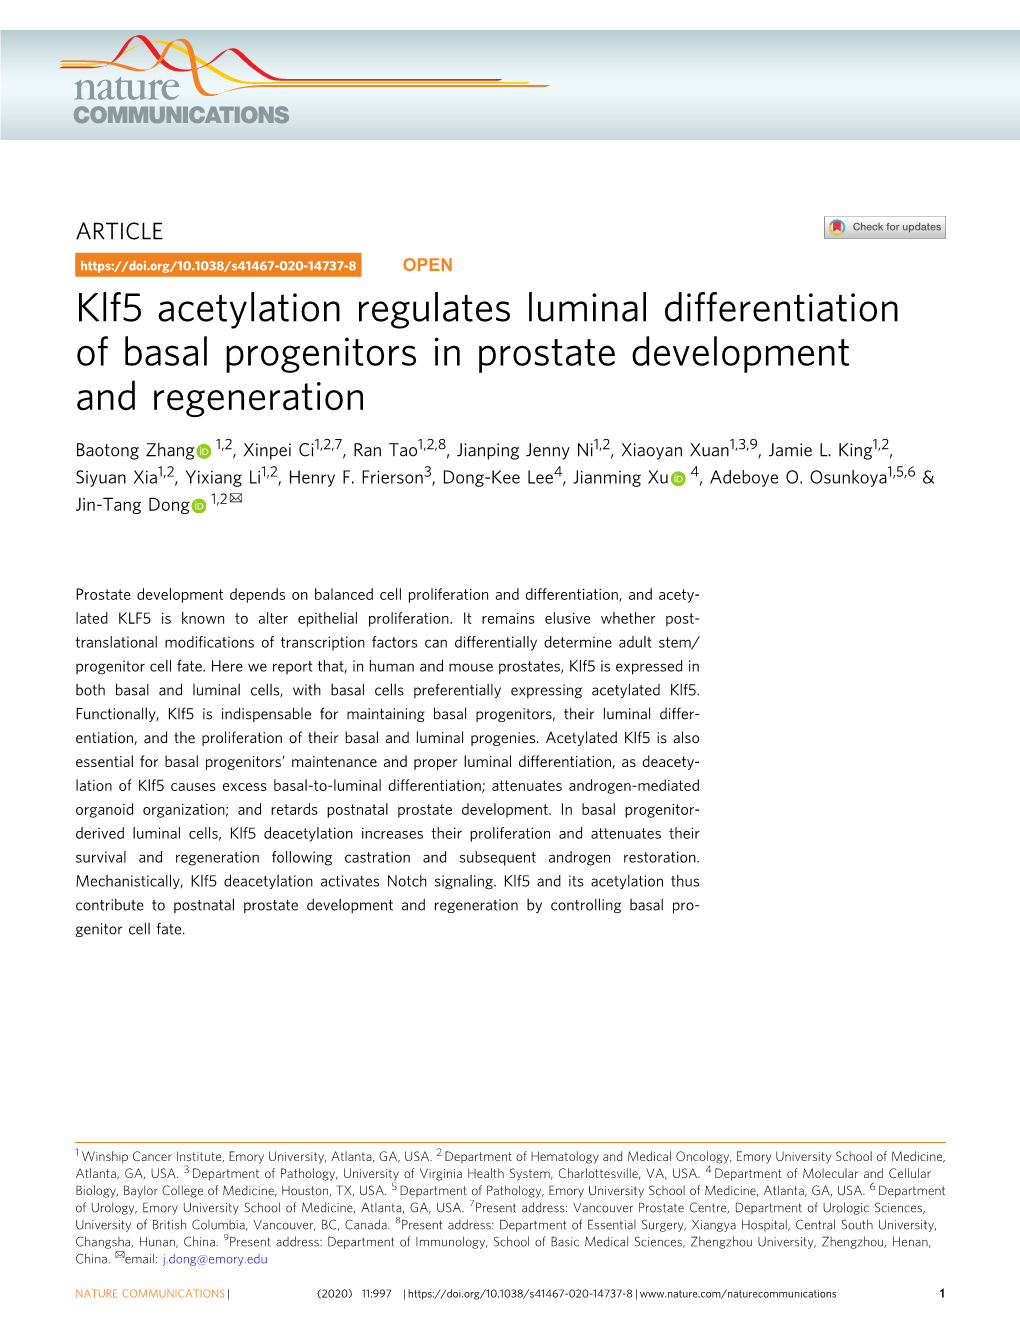 Klf5 Acetylation Regulates Luminal Differentiation of Basal Progenitors in Prostate Development and Regeneration